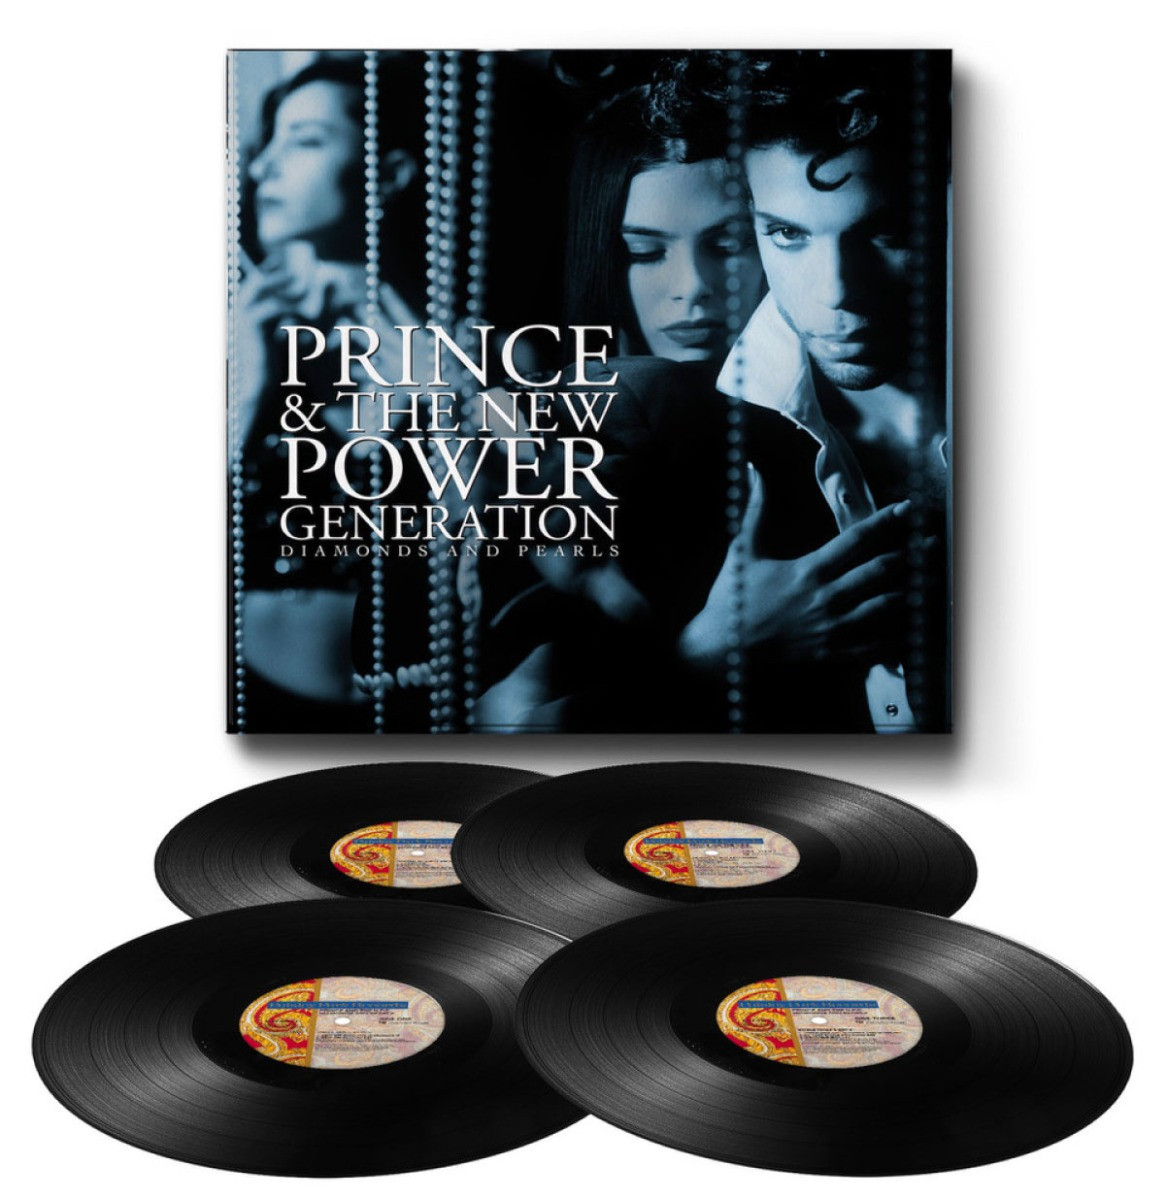 Prince & The New Power Generation - Diamonds And Pearls (Box Set) 4LP